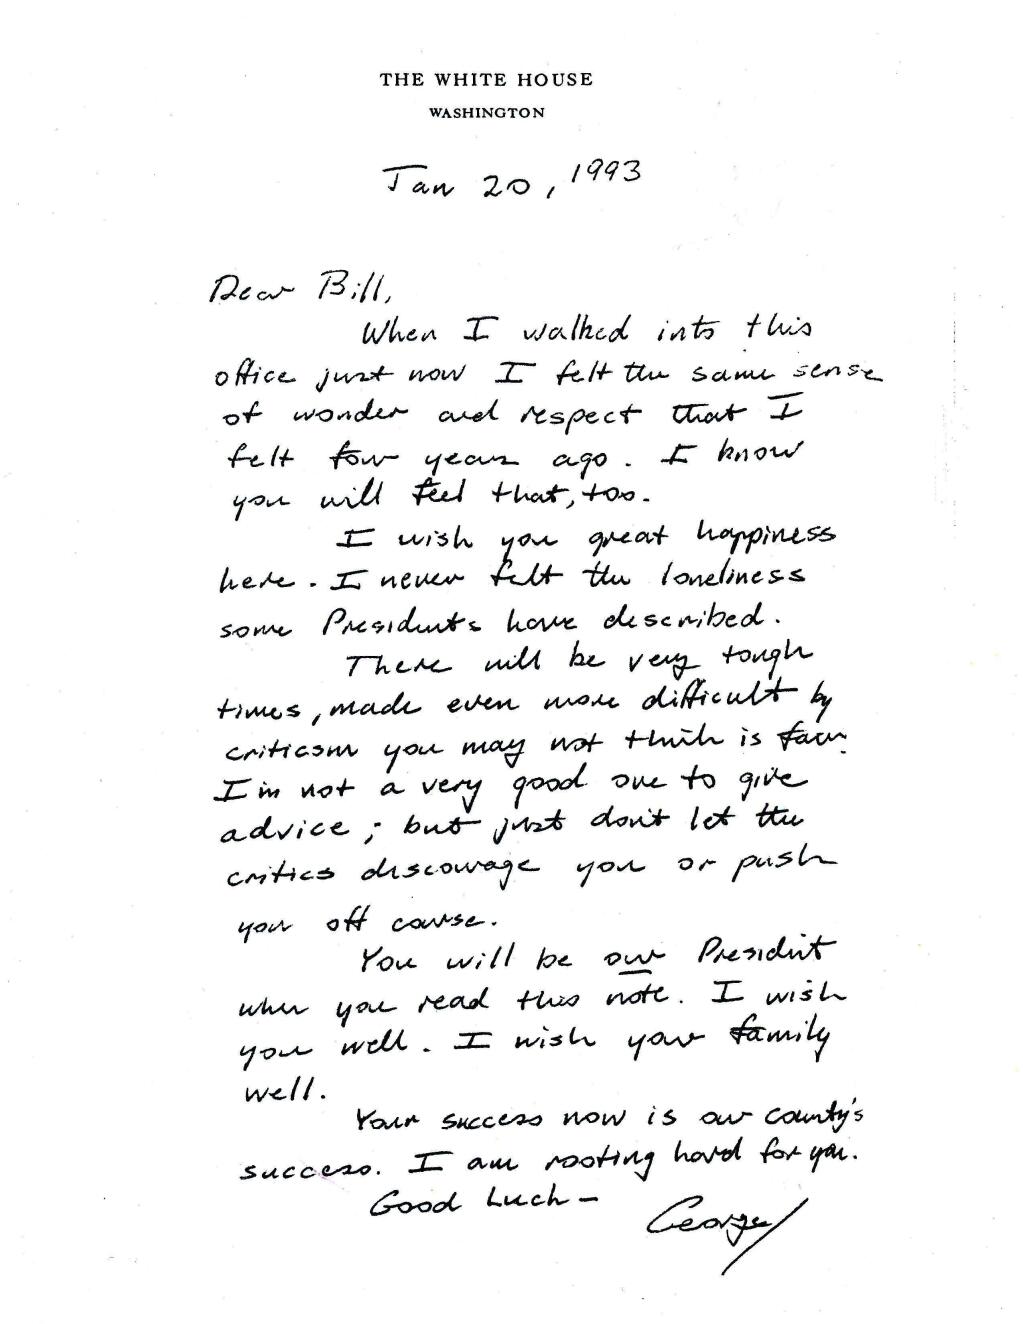 This image provided by the George H.W. Bush Presidential Library and Museum shows a note written by George H.W. Bush to Bill Clinton. (George H.W. Bush Presidential Library and Museum via AP)